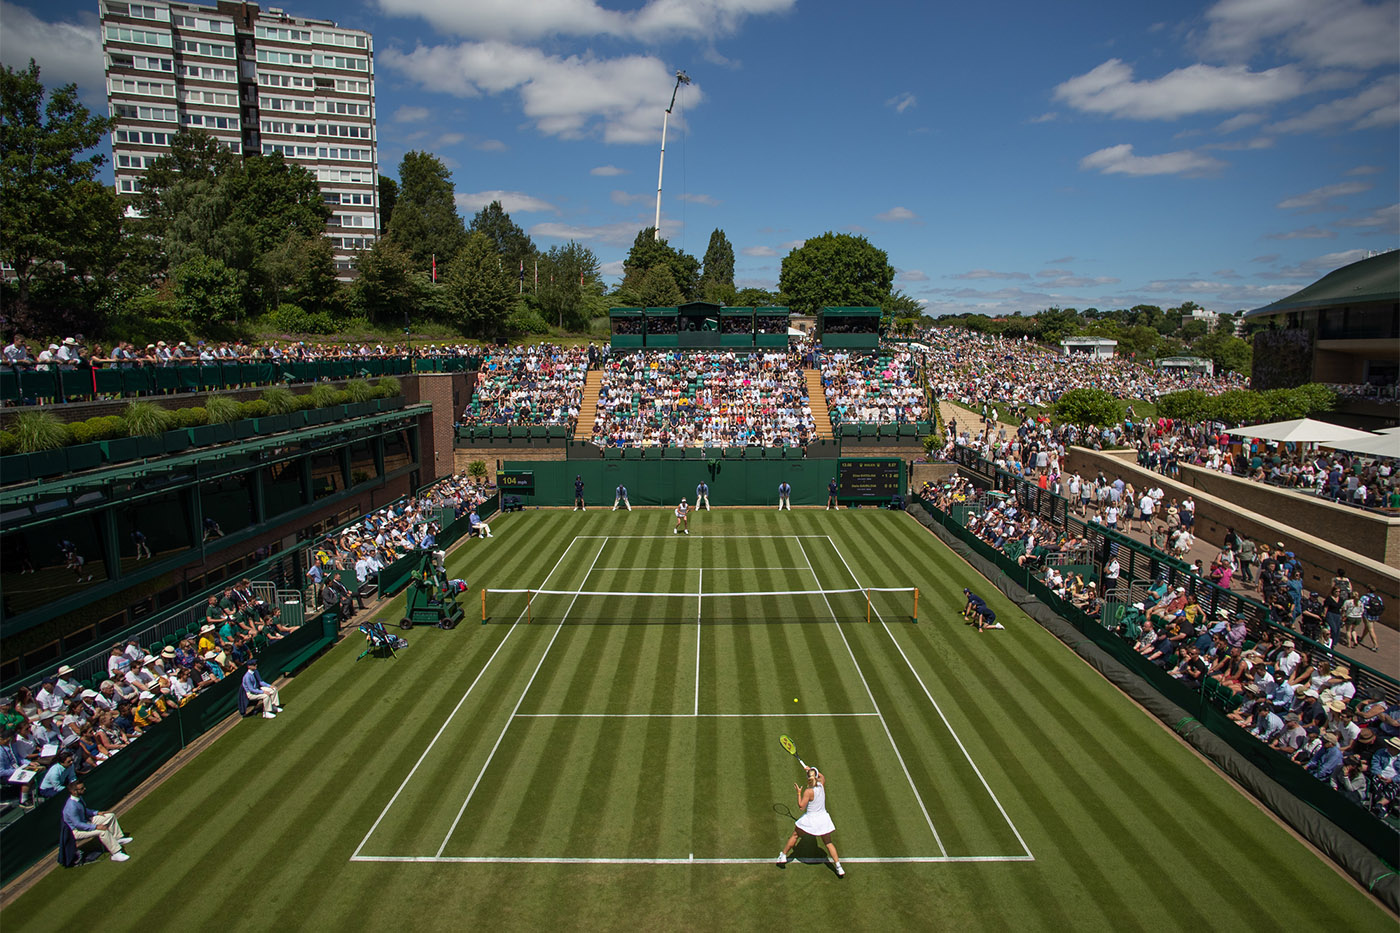 Vantage point: Court 18 - The Championships, Wimbledon 2021 - Official Site  by IBM